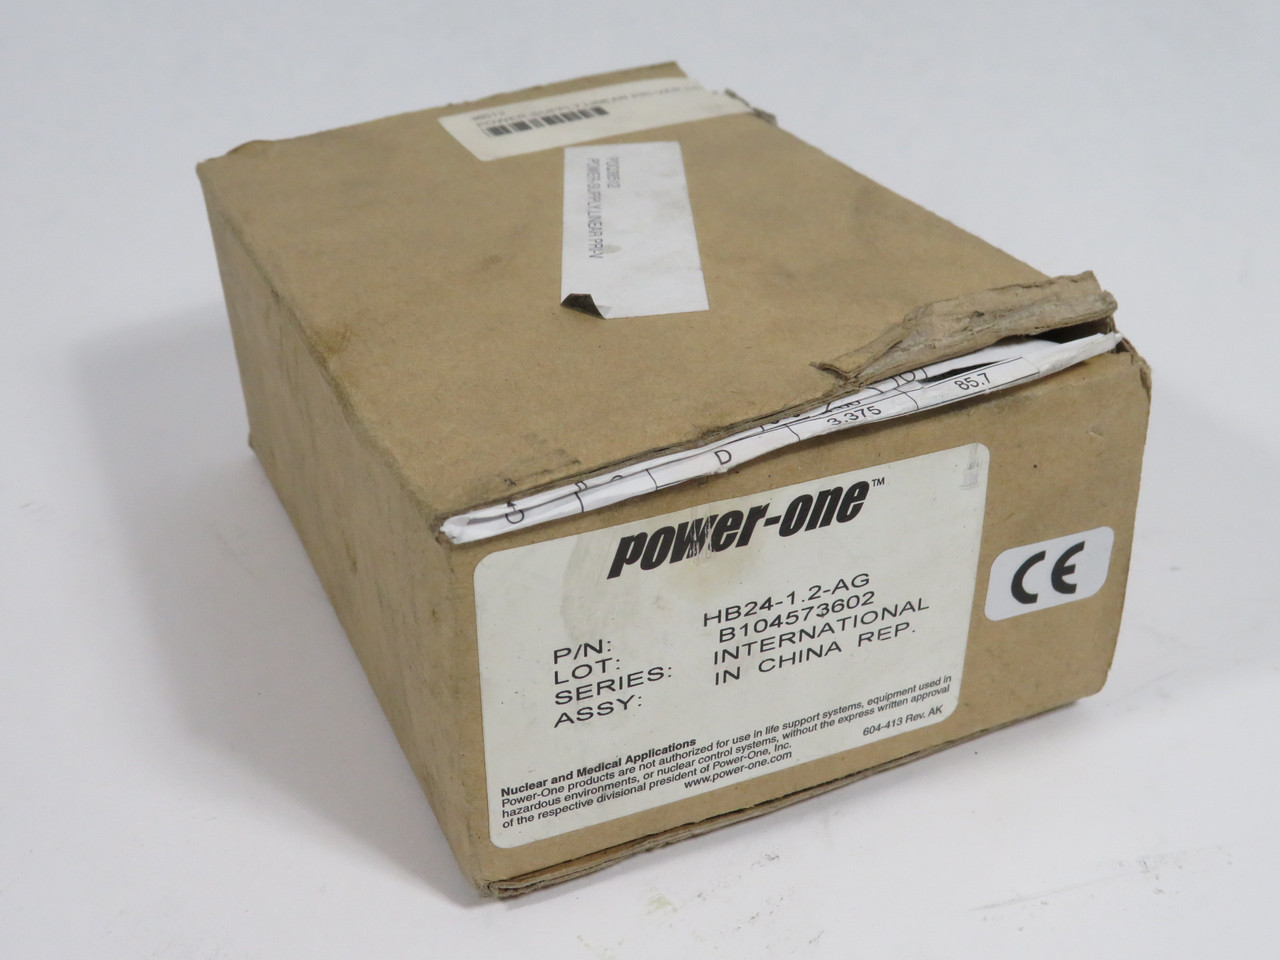 Power-One HB24-1.2-AG Linear Power Supply 24VDC 1.2A BOX WEAR NEW